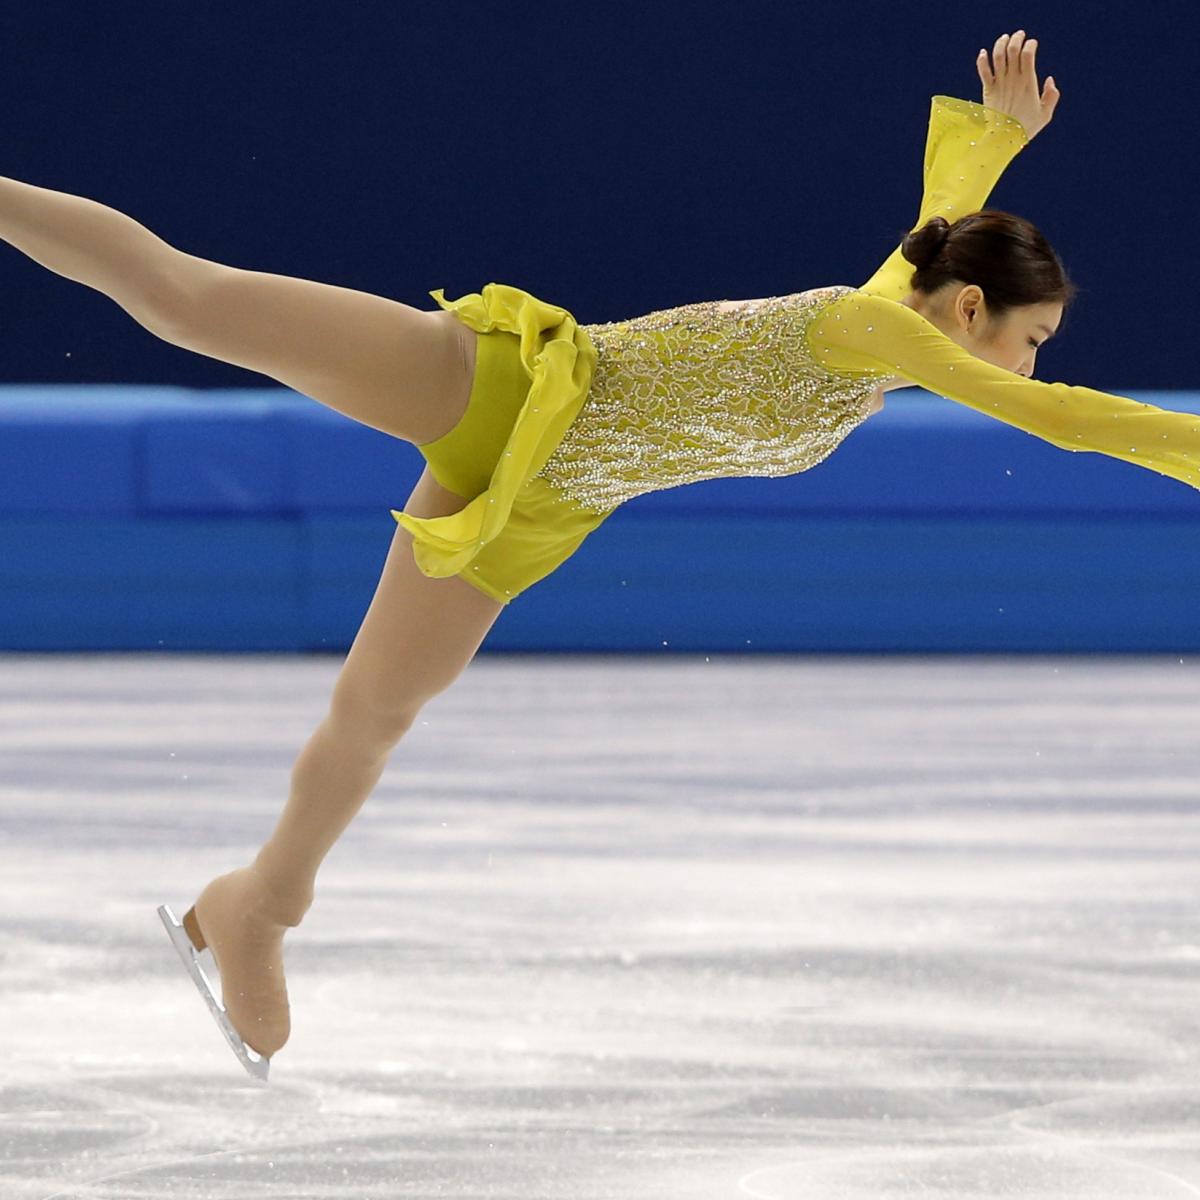 Olympic Figure Skating Schedule 2014 TV and Live Stream Info for Day